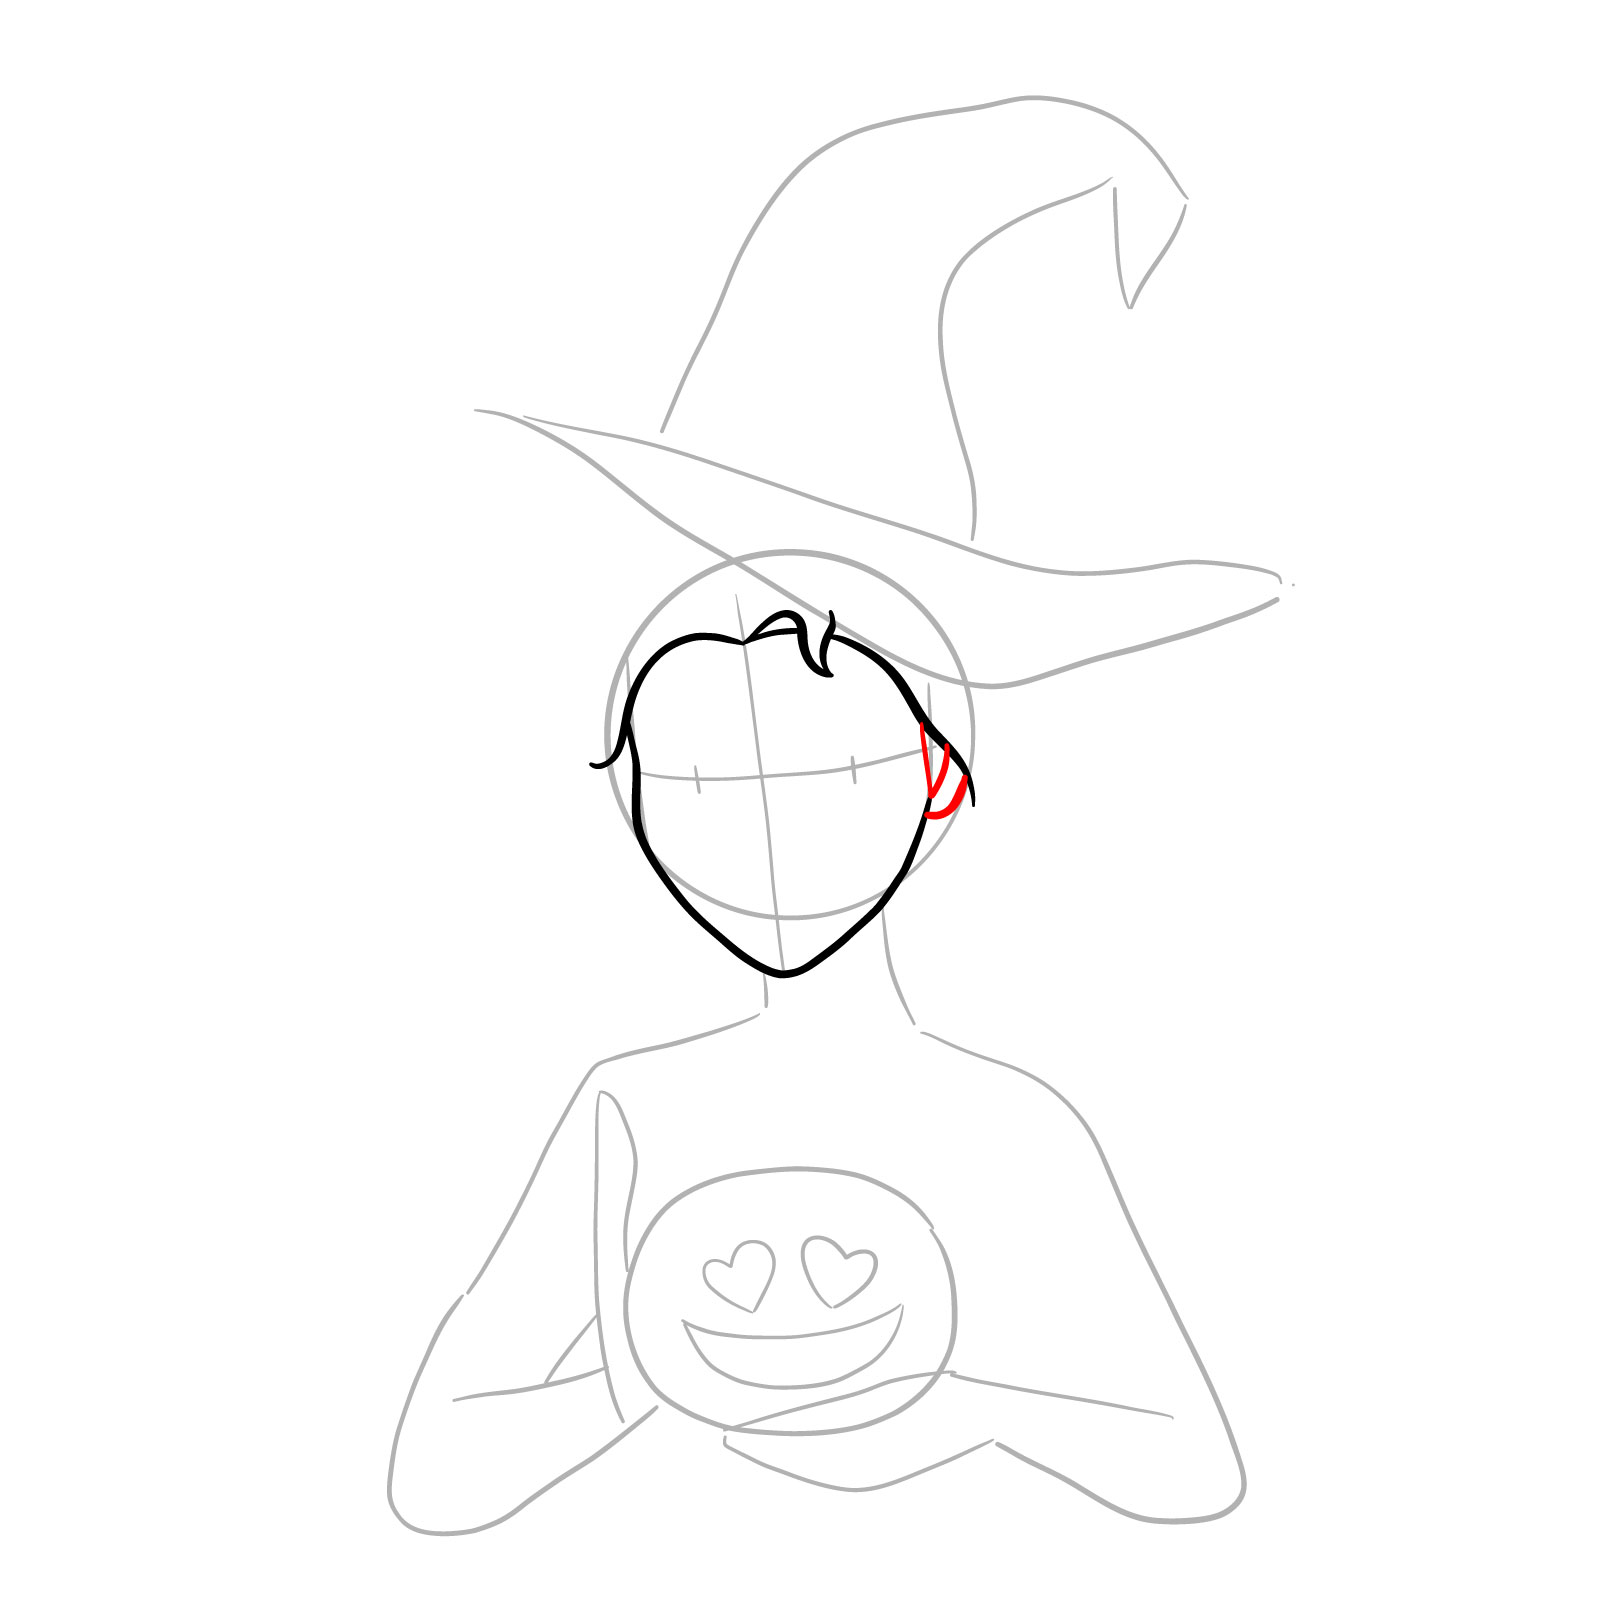 How to Draw Witch Elsa on Halloween - step 06